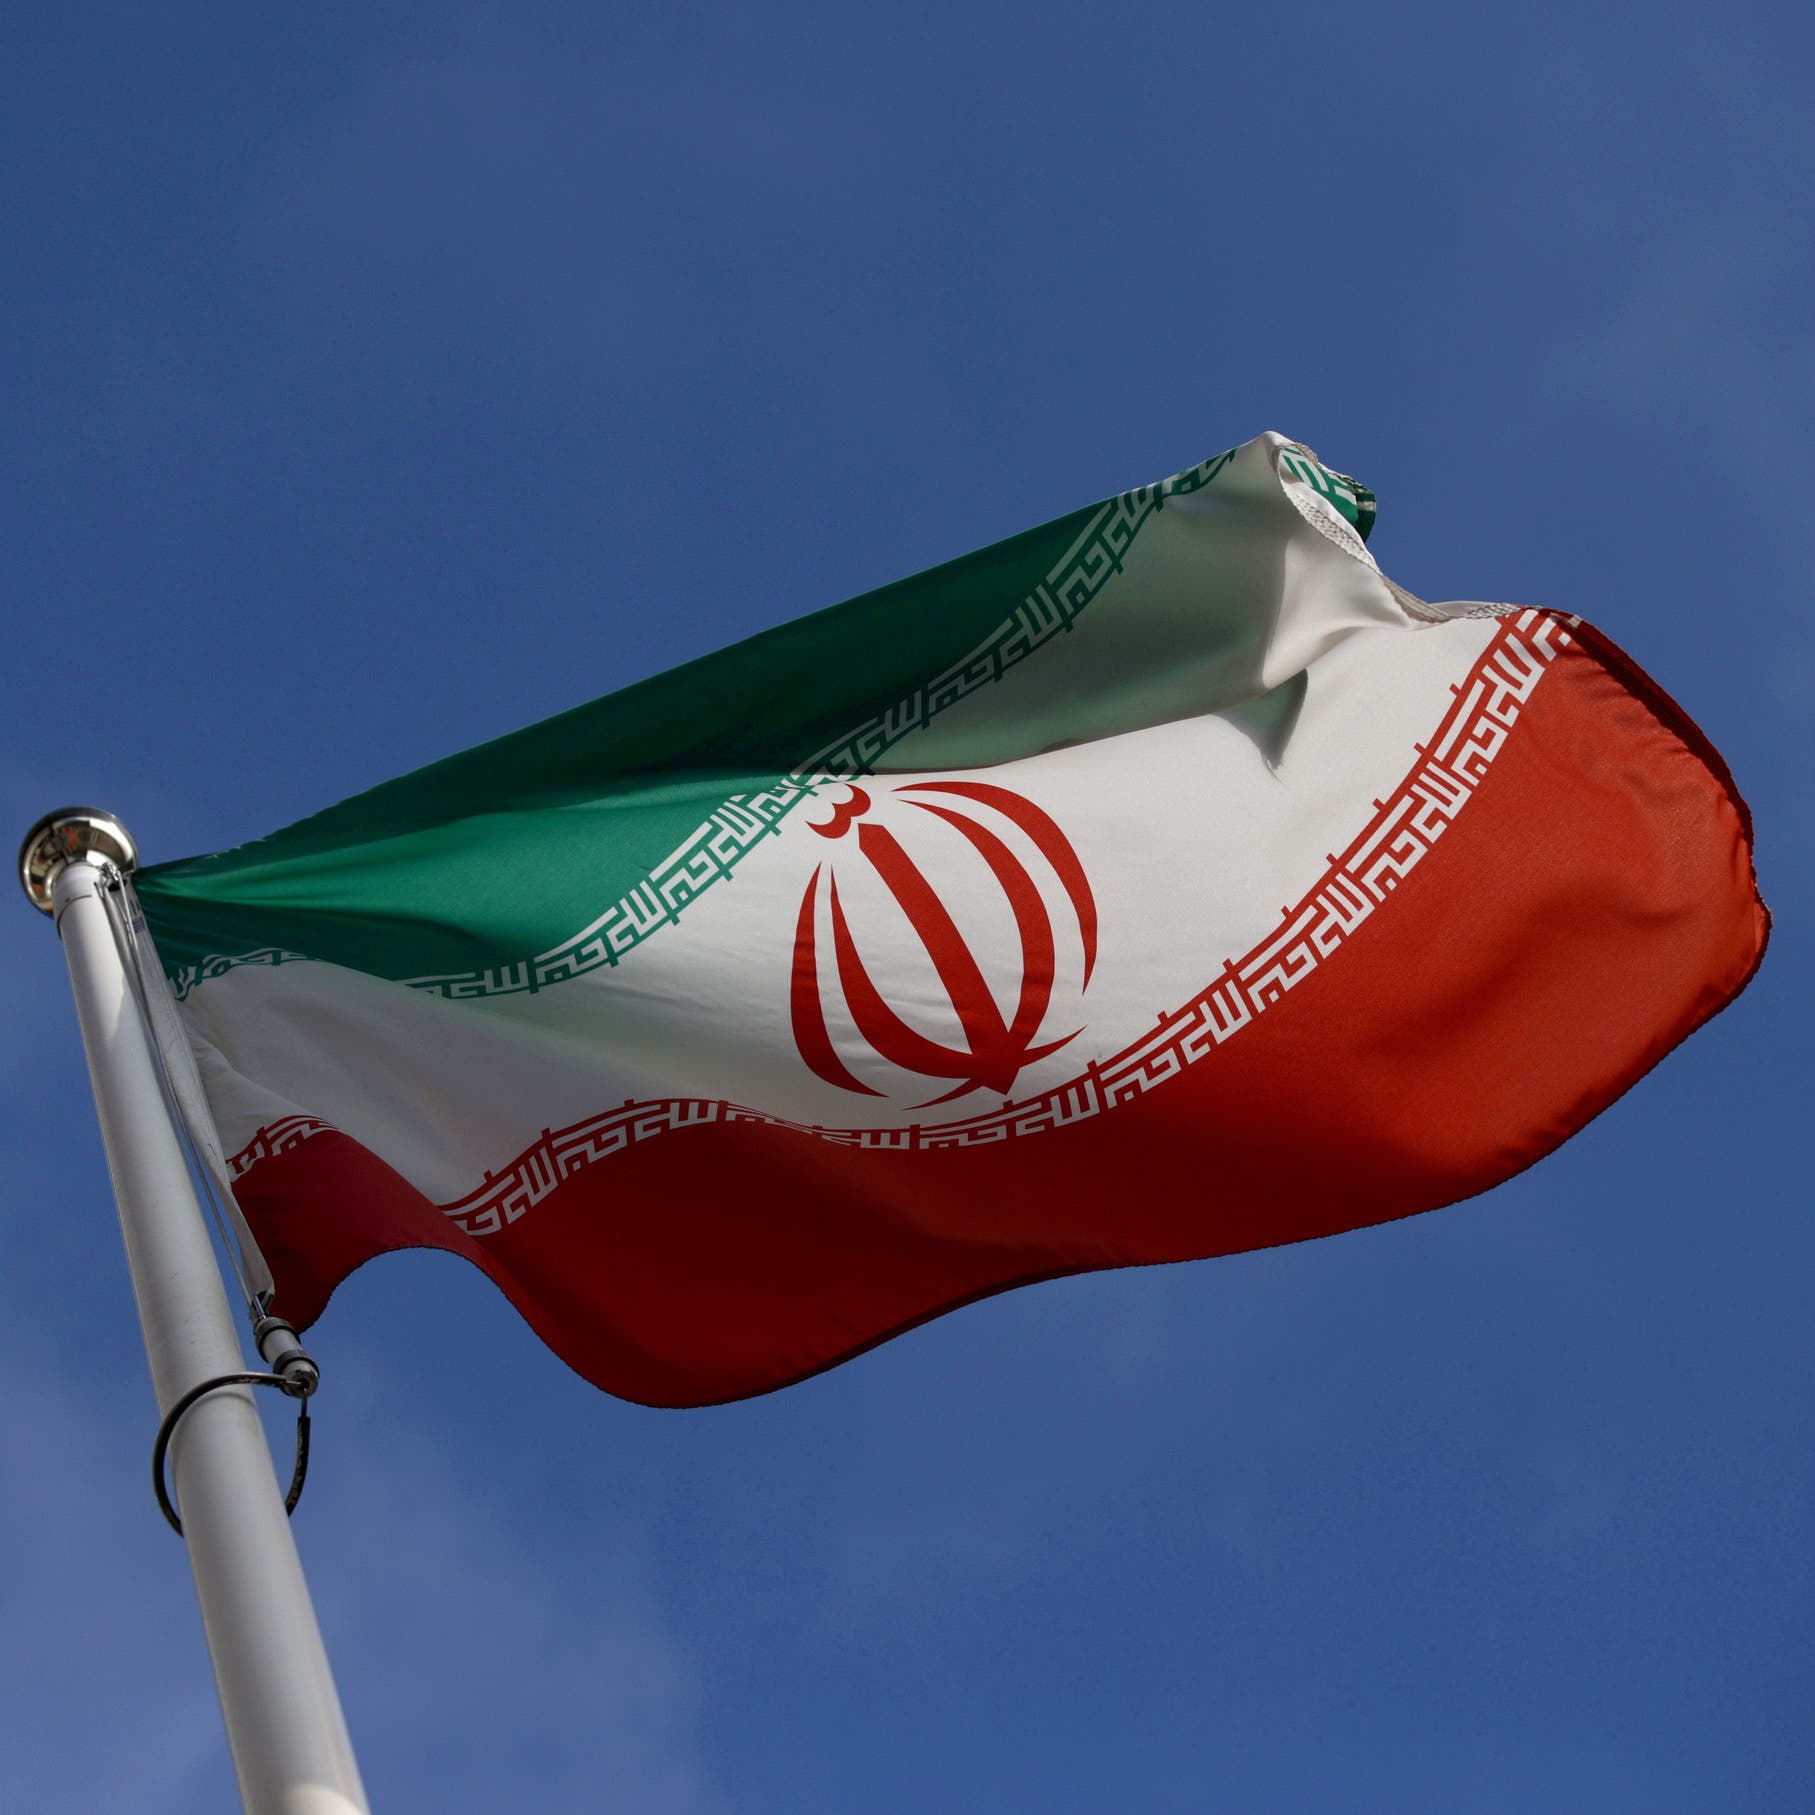 Iranian influence and the green Middle East